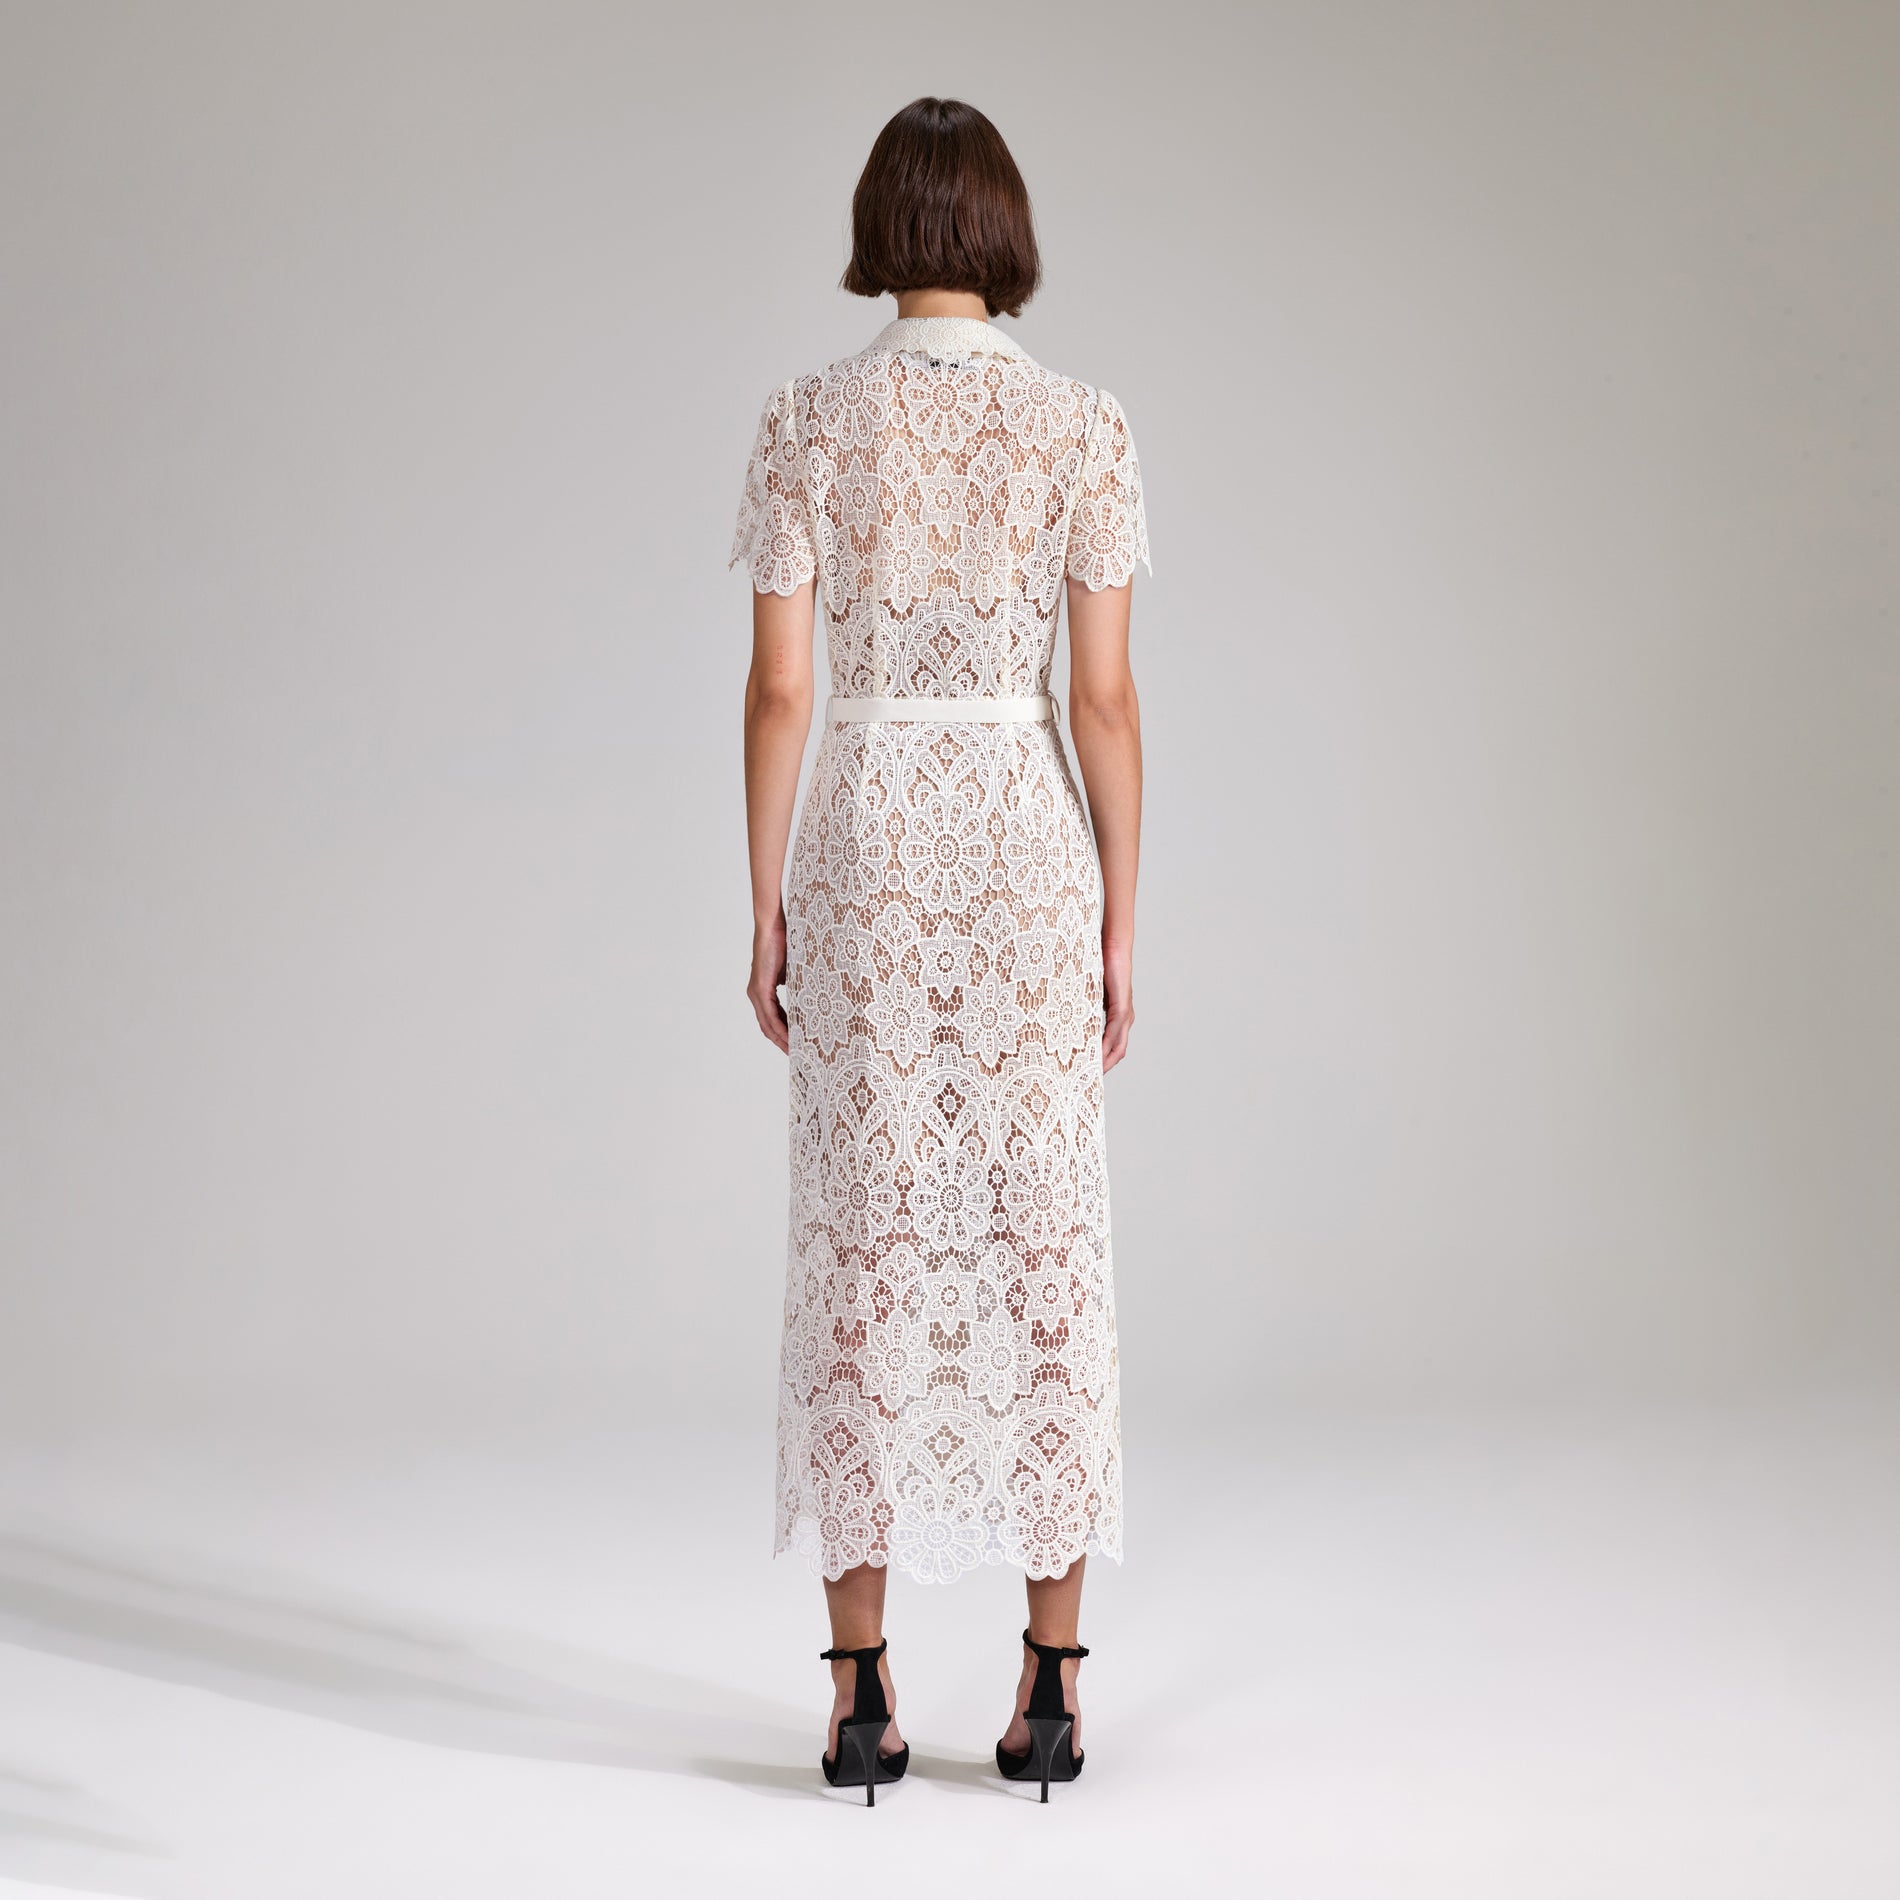 A woman wearing the Cream Floral Guipure Midi Dress